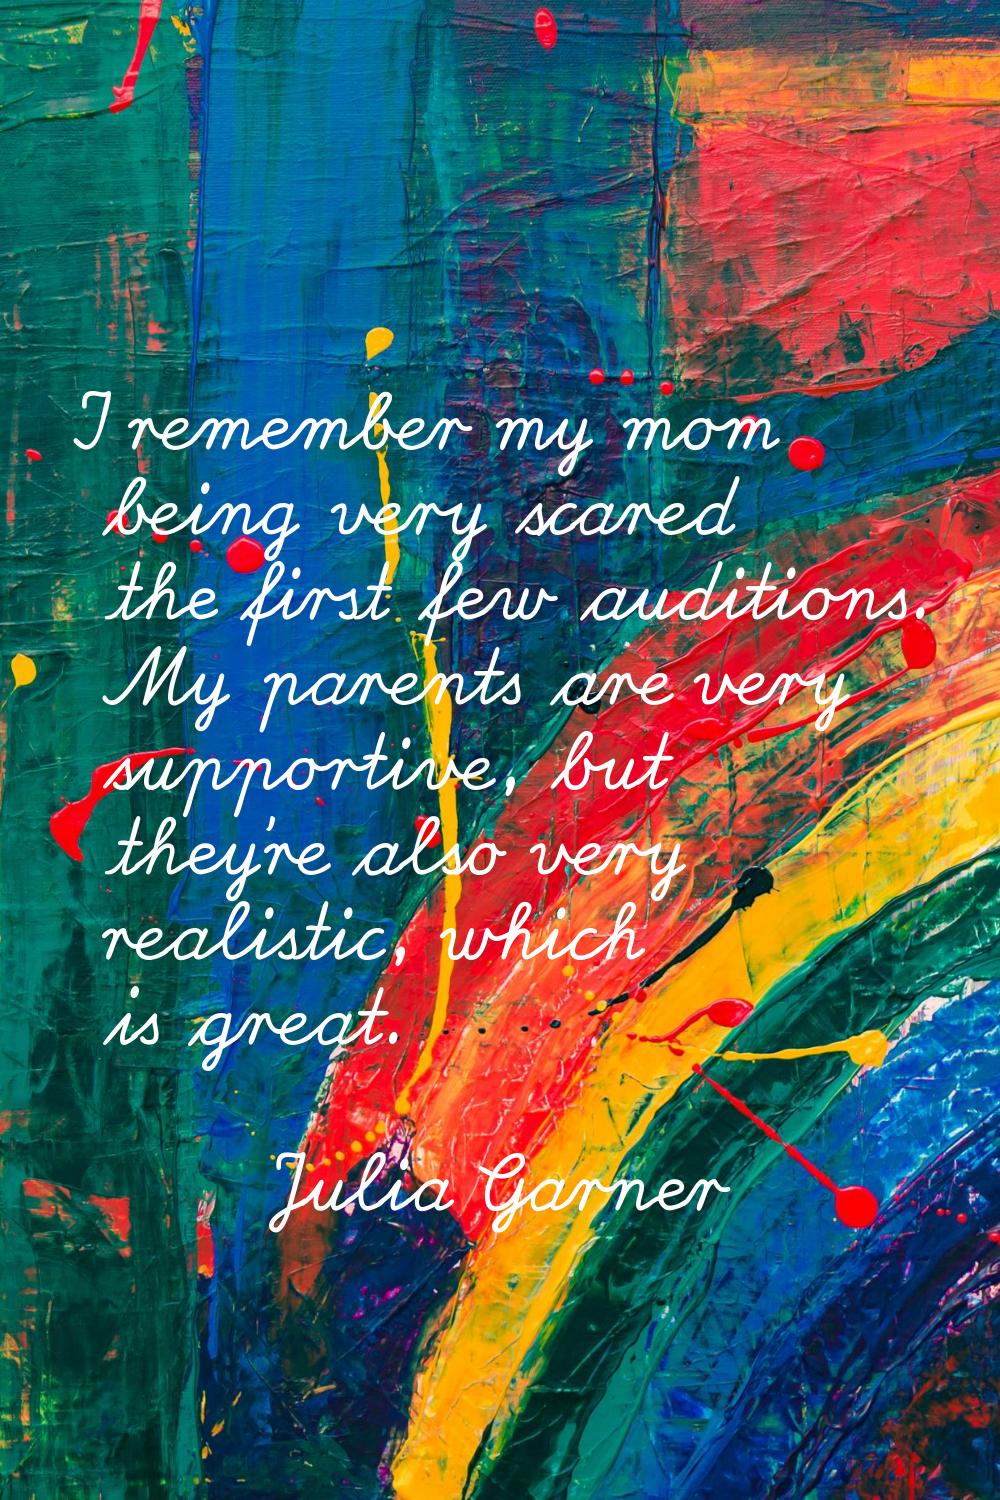 I remember my mom being very scared the first few auditions. My parents are very supportive, but th